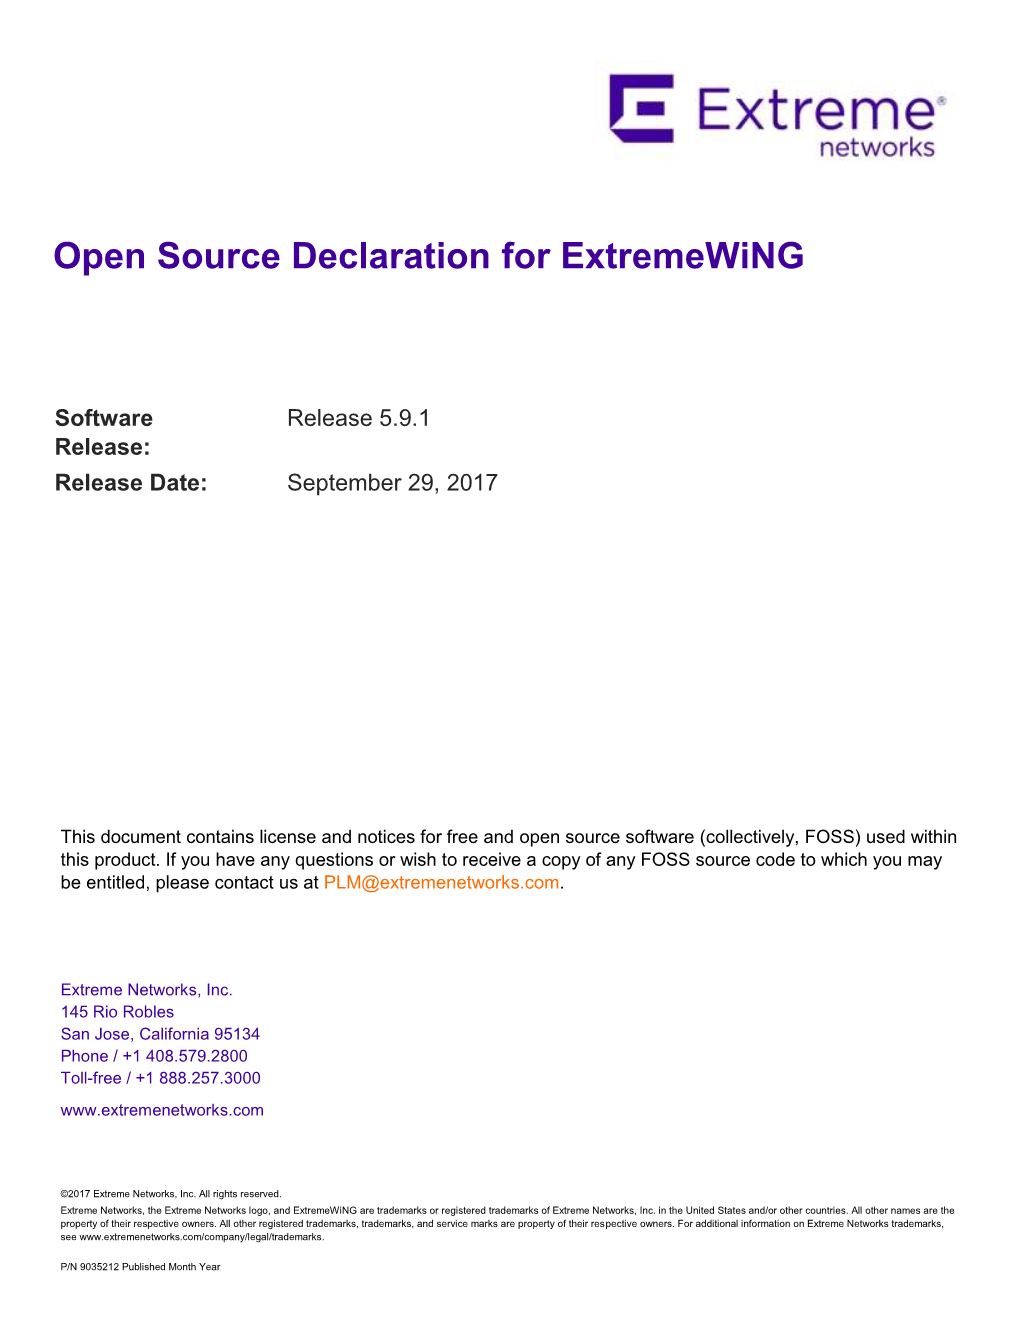 Open Source Declaration for Extremewing